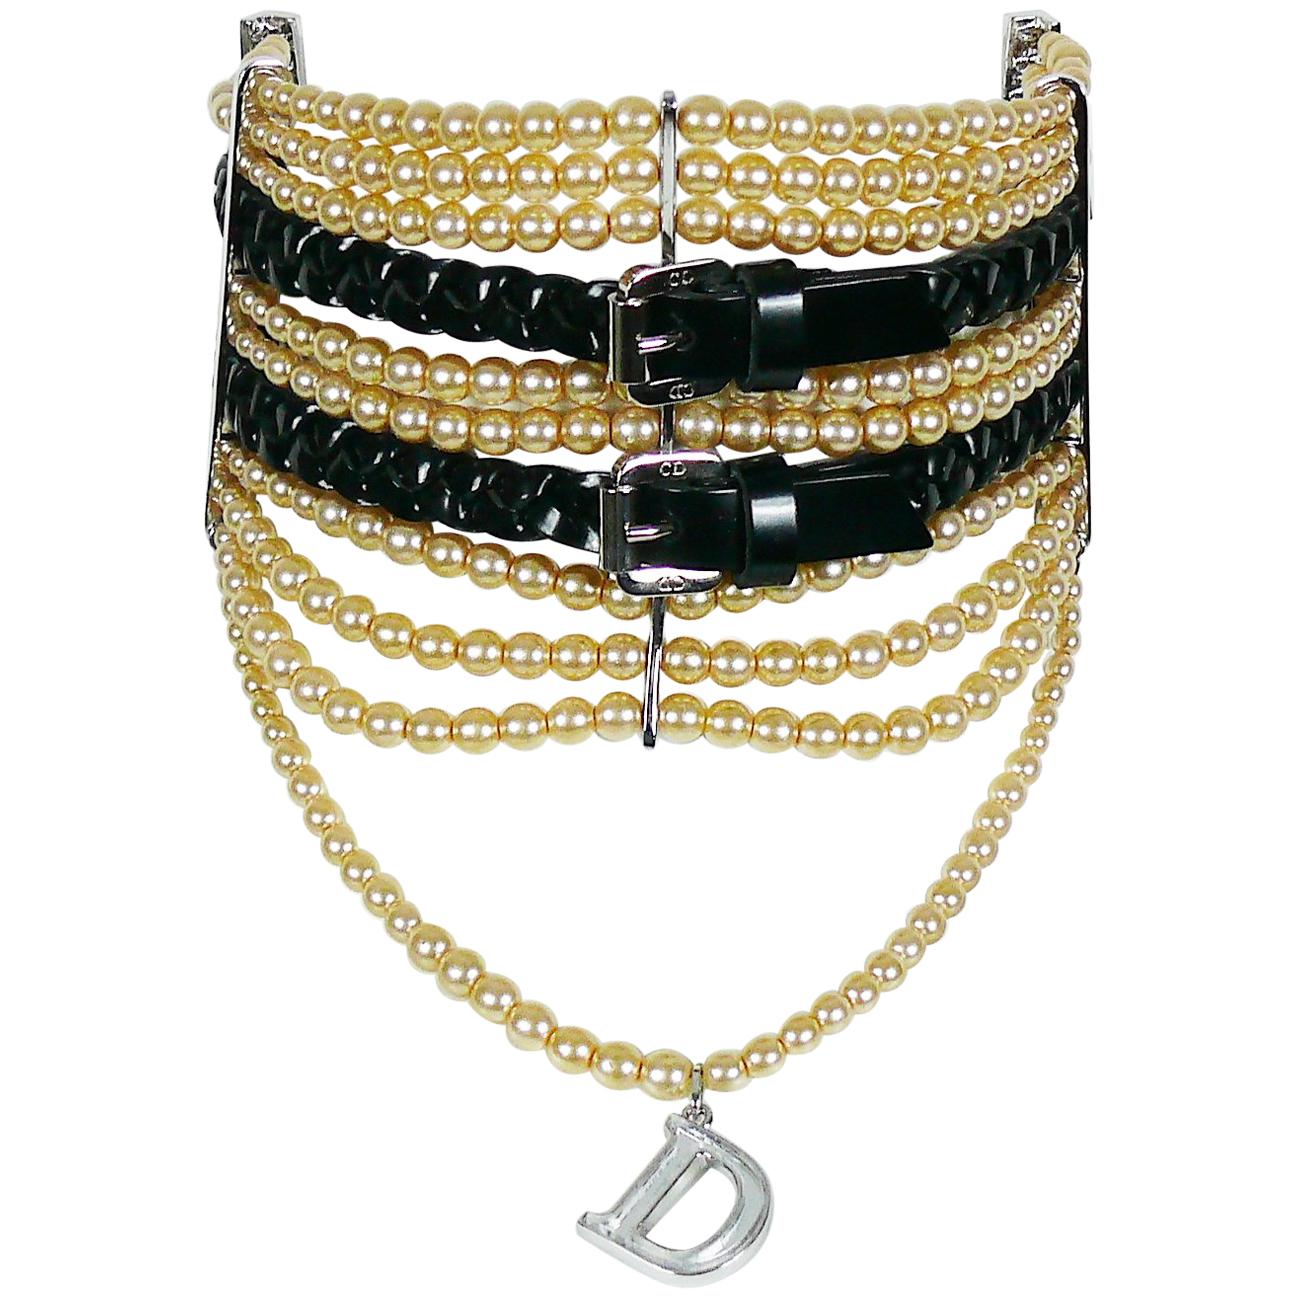 Christian Dior by John Galliano Masai Beaded Leather Buckle Choker Necklace